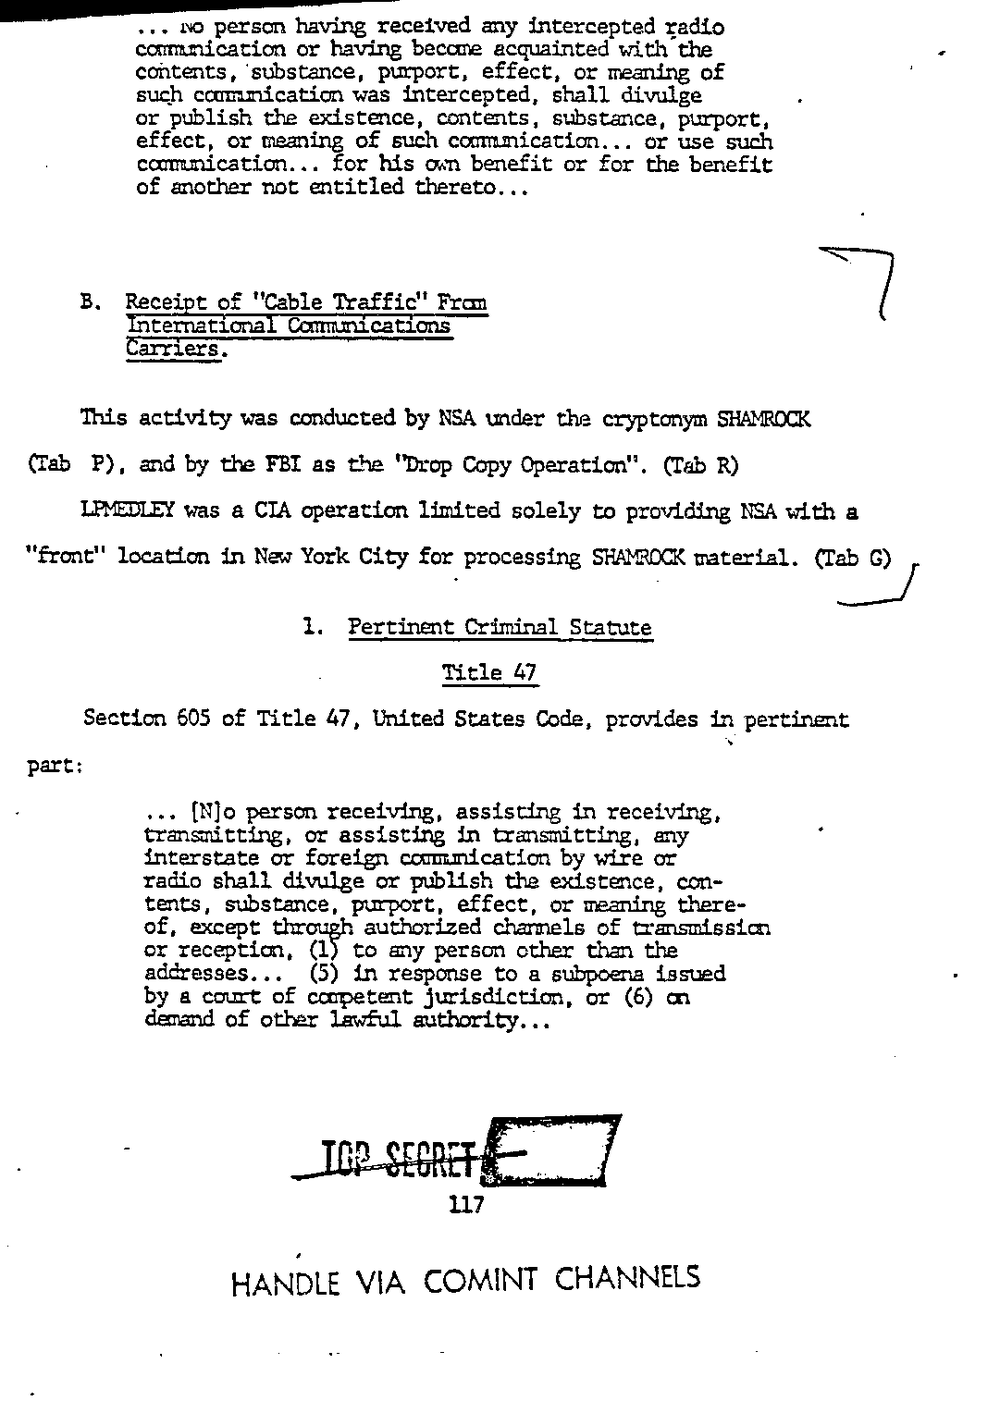 Page 125 from Report on Inquiry Into CIA Related Electronic Surveillance Activities